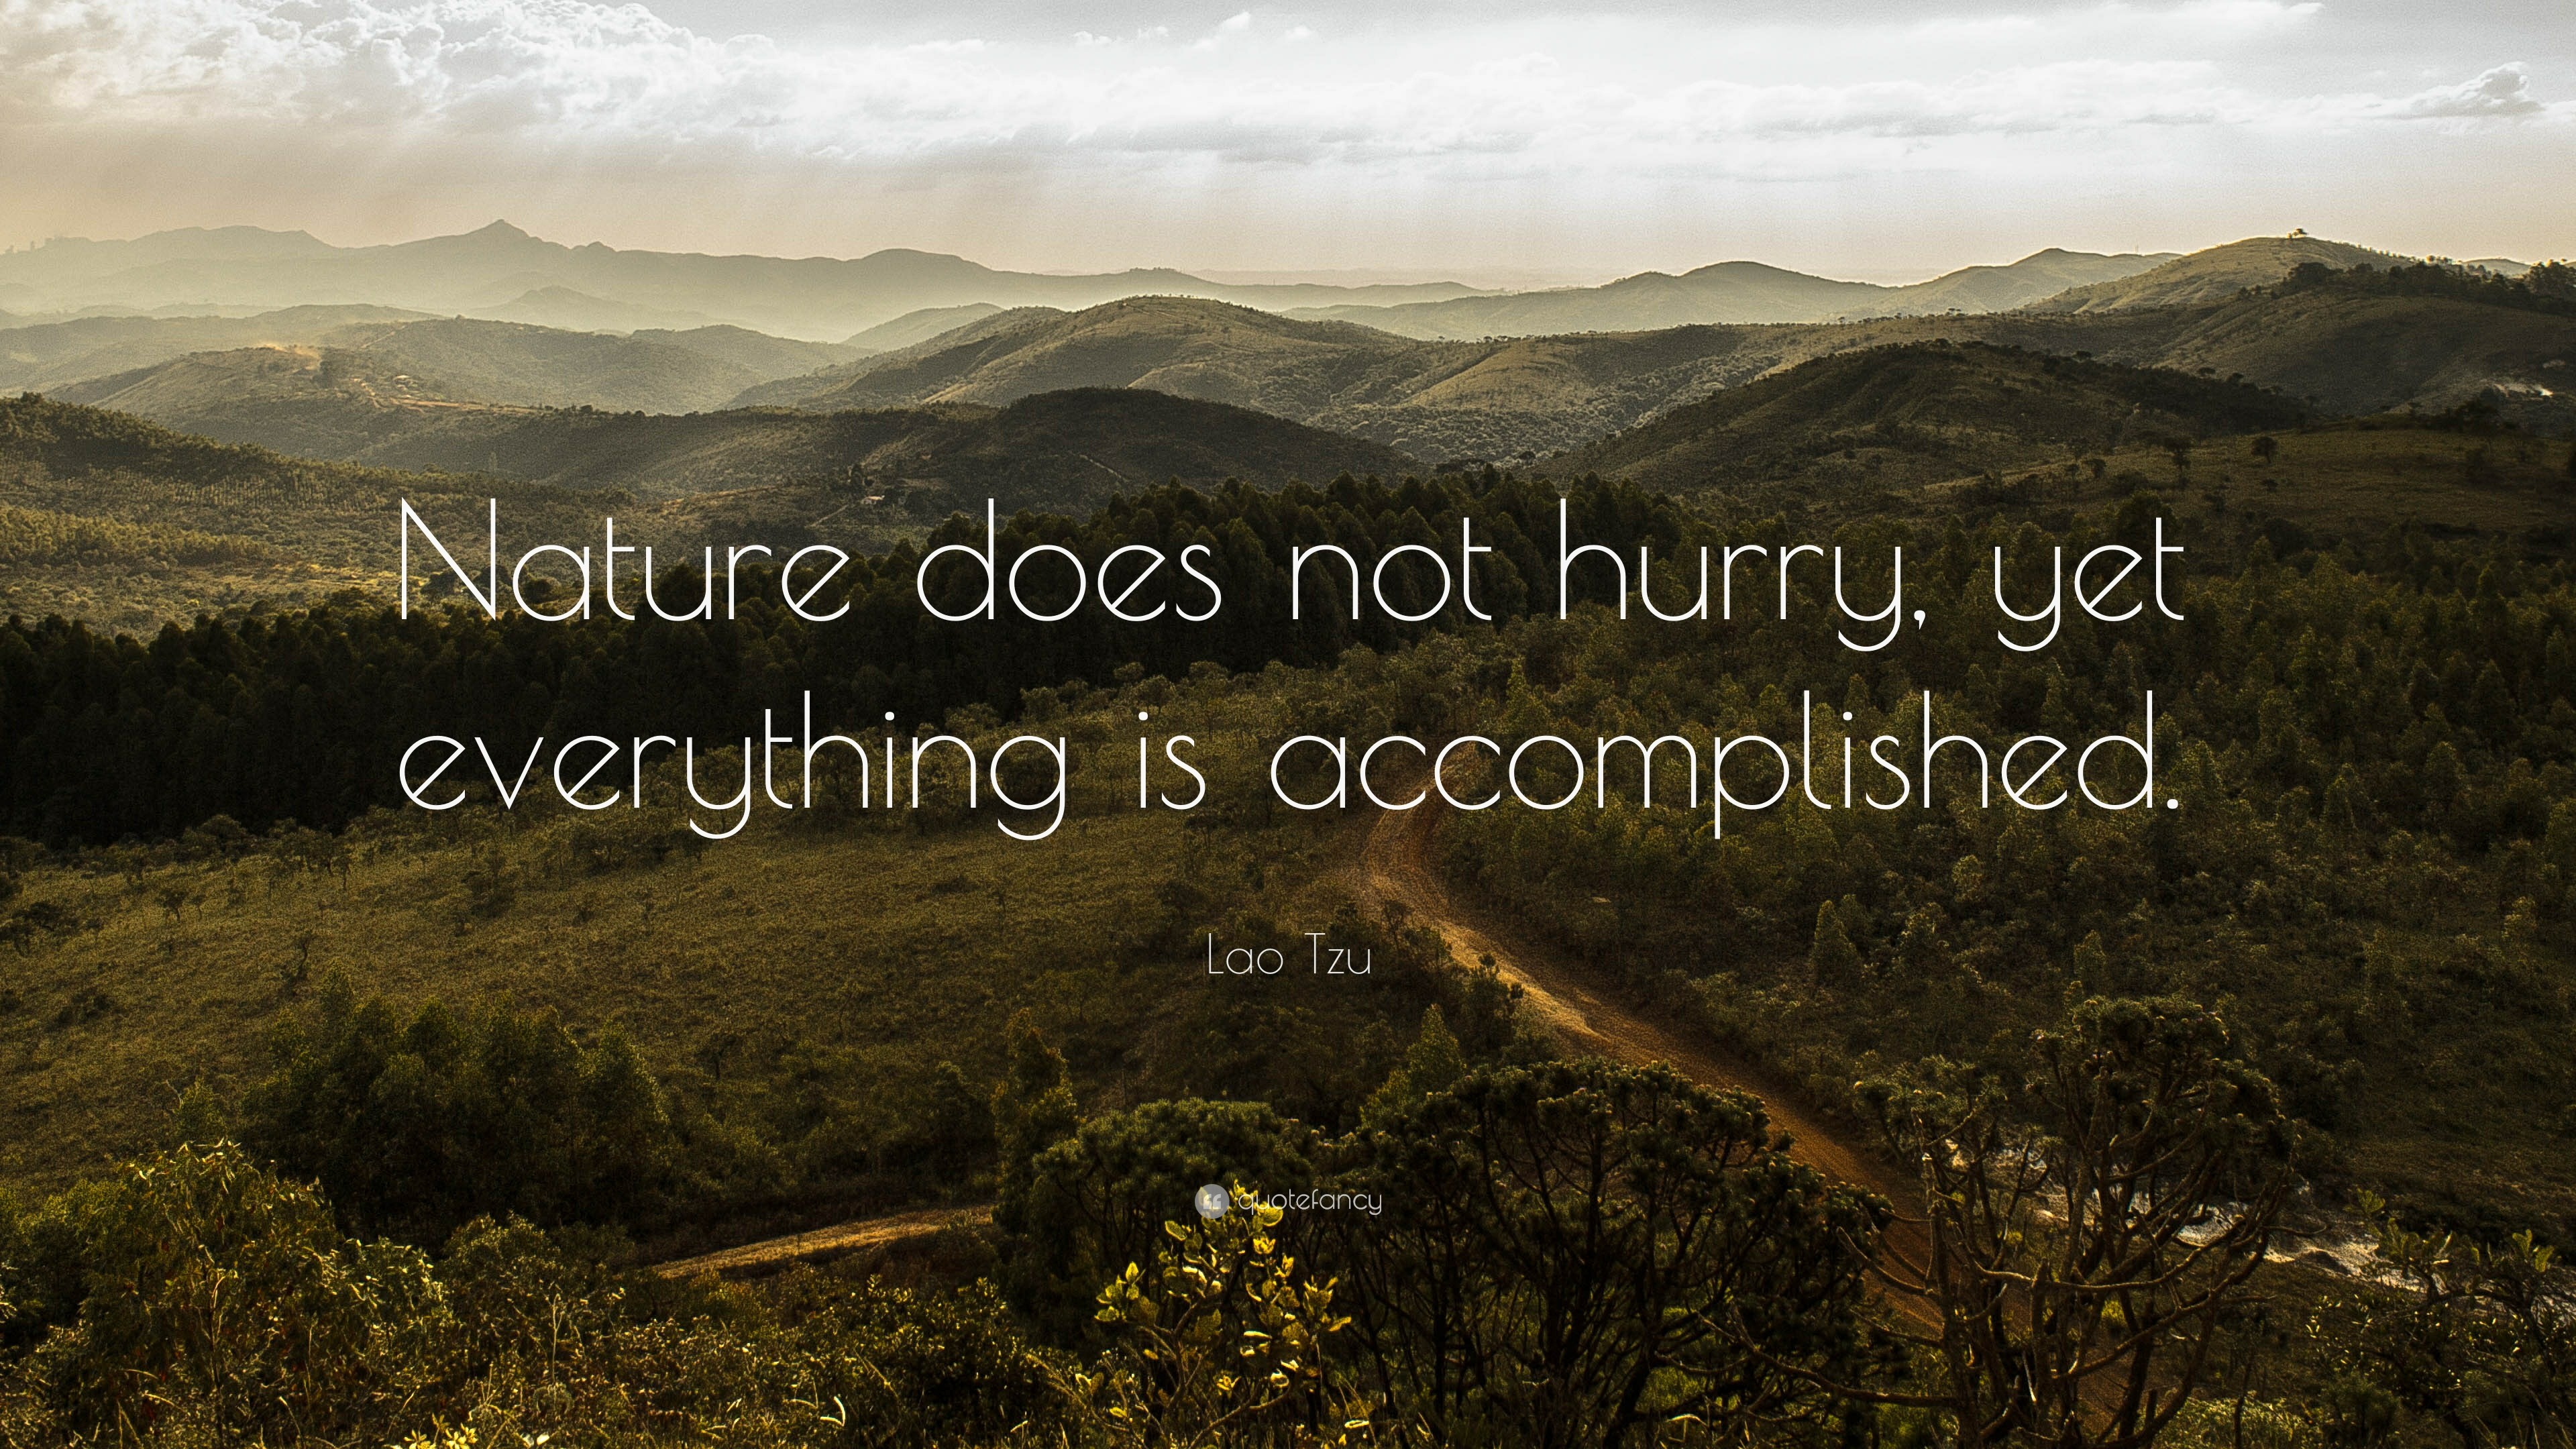 3840x2160 Lao Tzu Quote: “Nature does not hurry, yet everything is accomplished.”